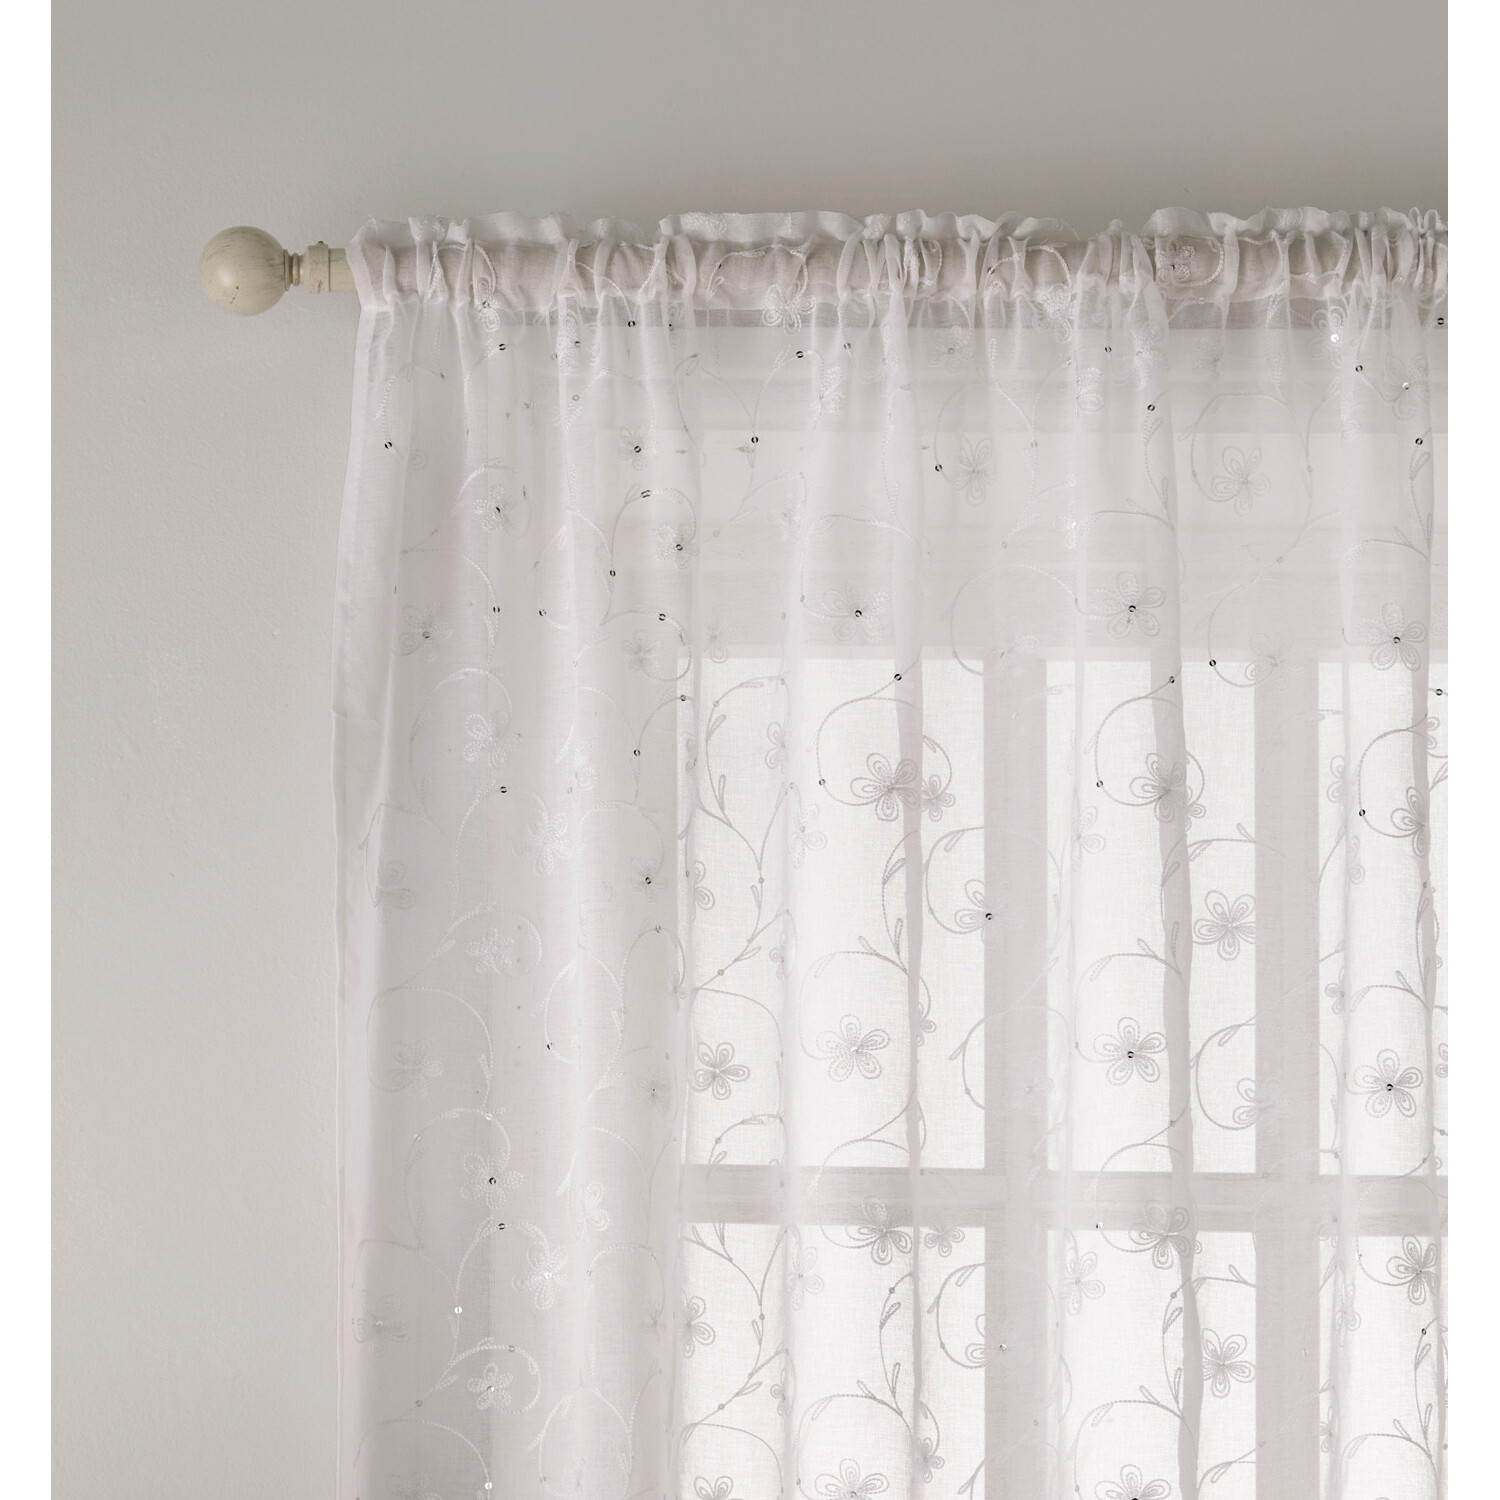 Belle White Embroidered Voile Curtain 229 x 140cm Image 2